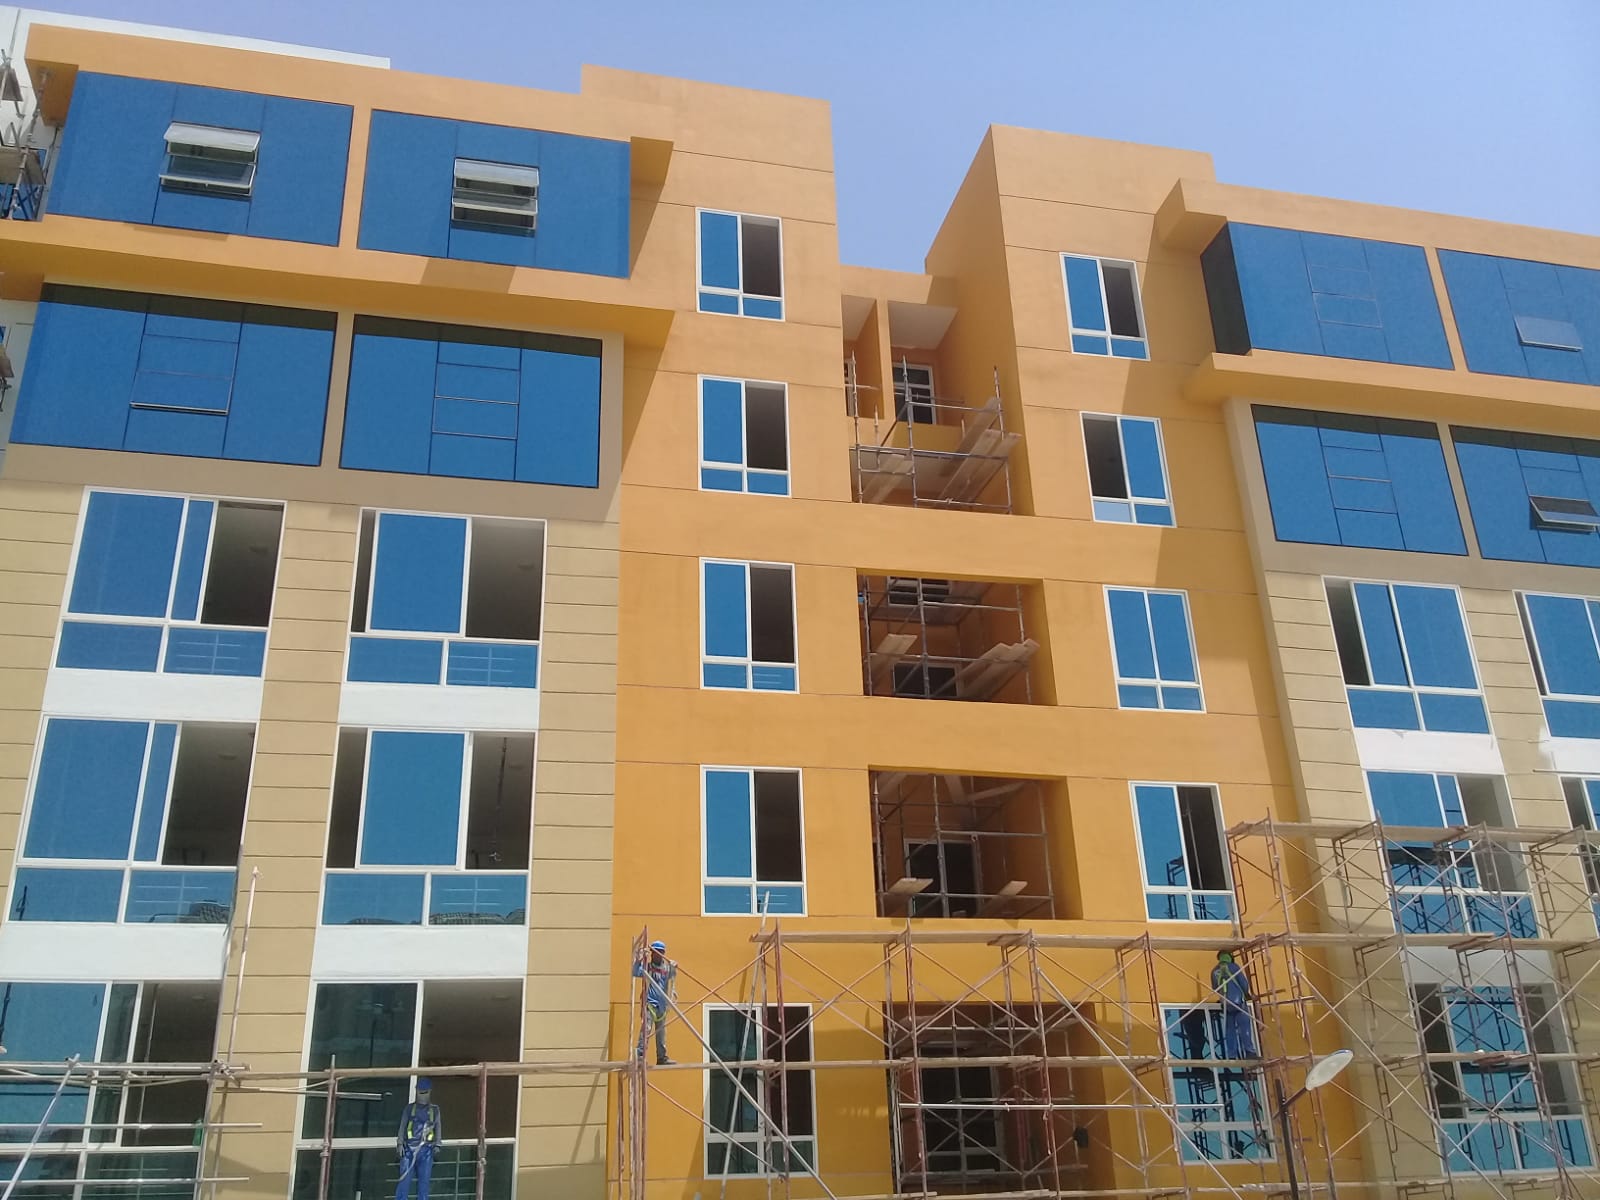 Aluminium & Glazing Work for Doors, Windows & Curtin Wall for Apartments Complex